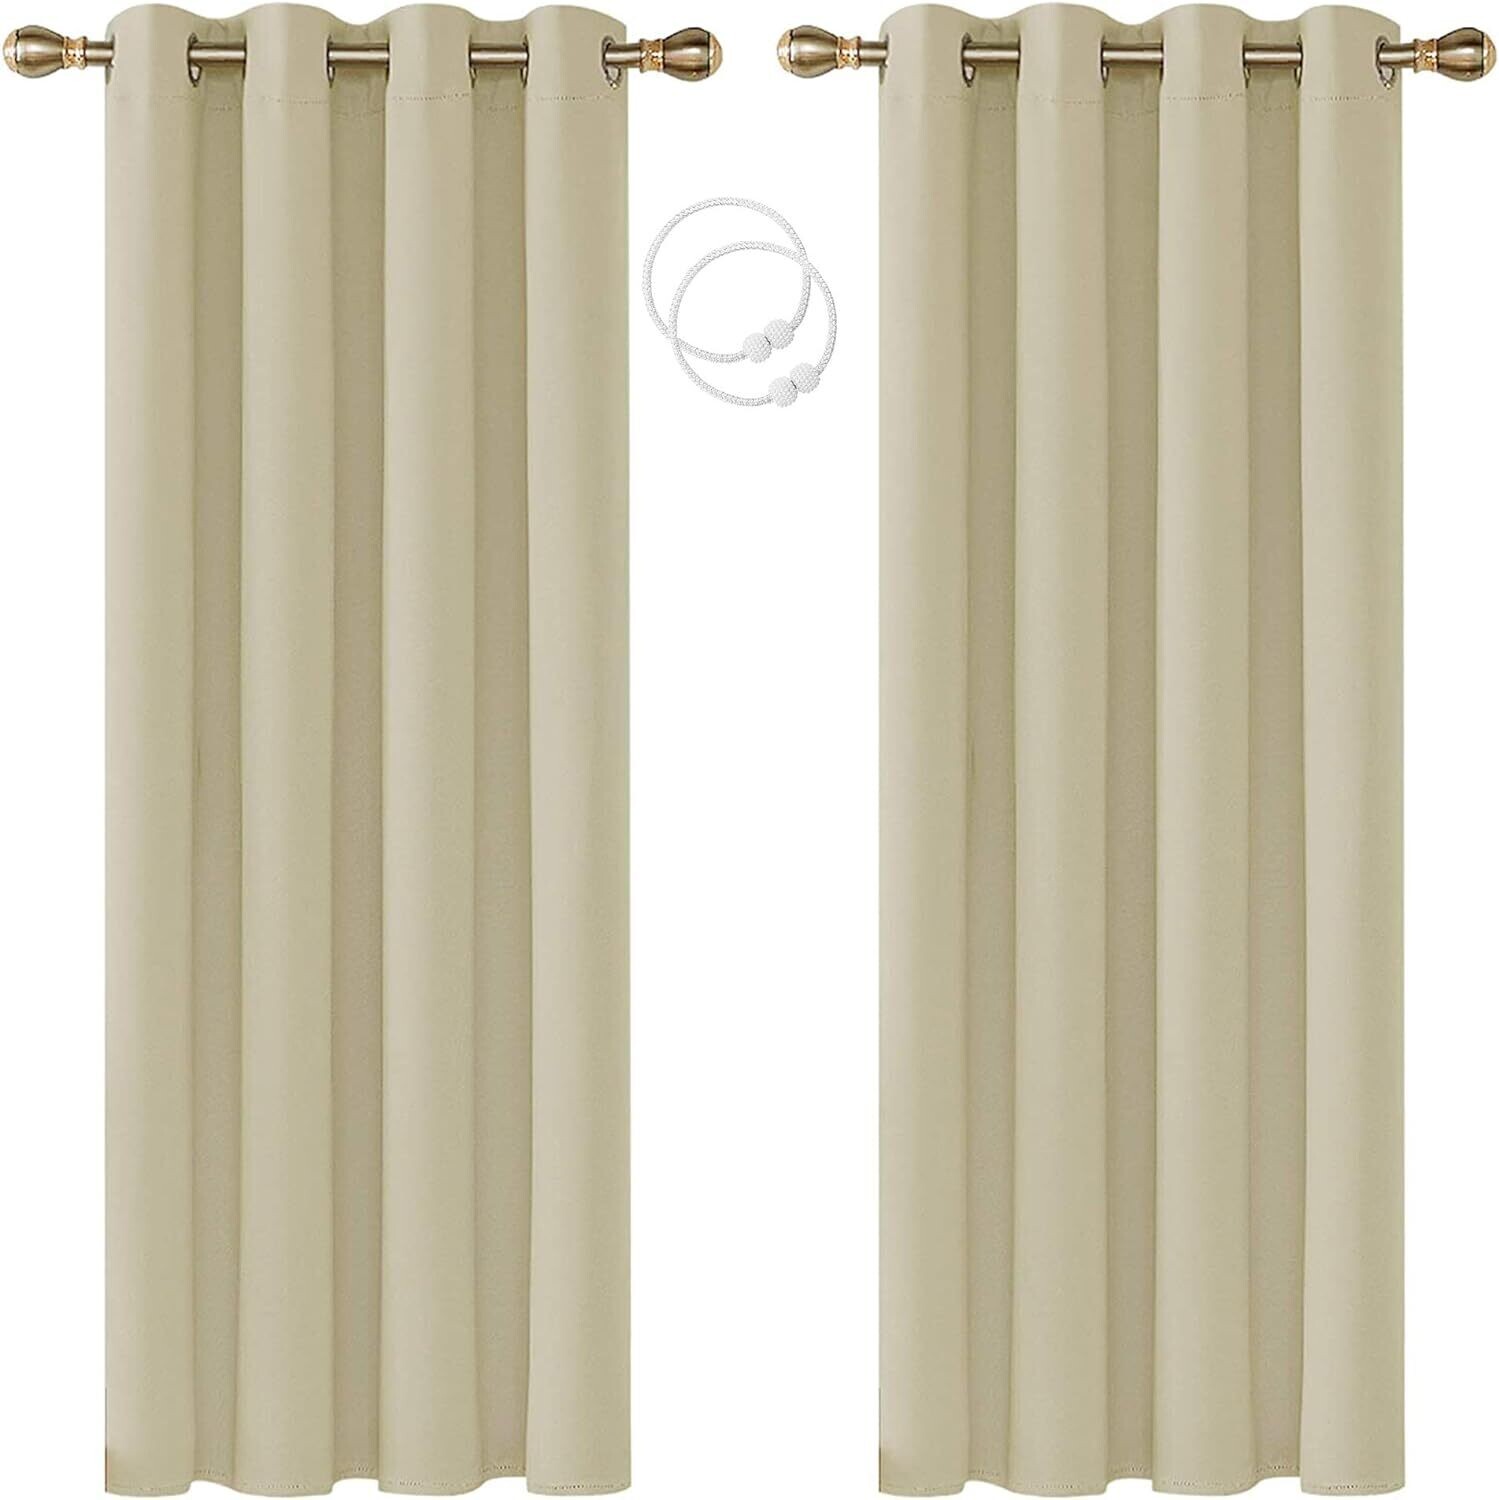 Eyelets Curtain with Tie Backs Opaque Short Window Curtain Blackout Curtain for Living Room Bedroom